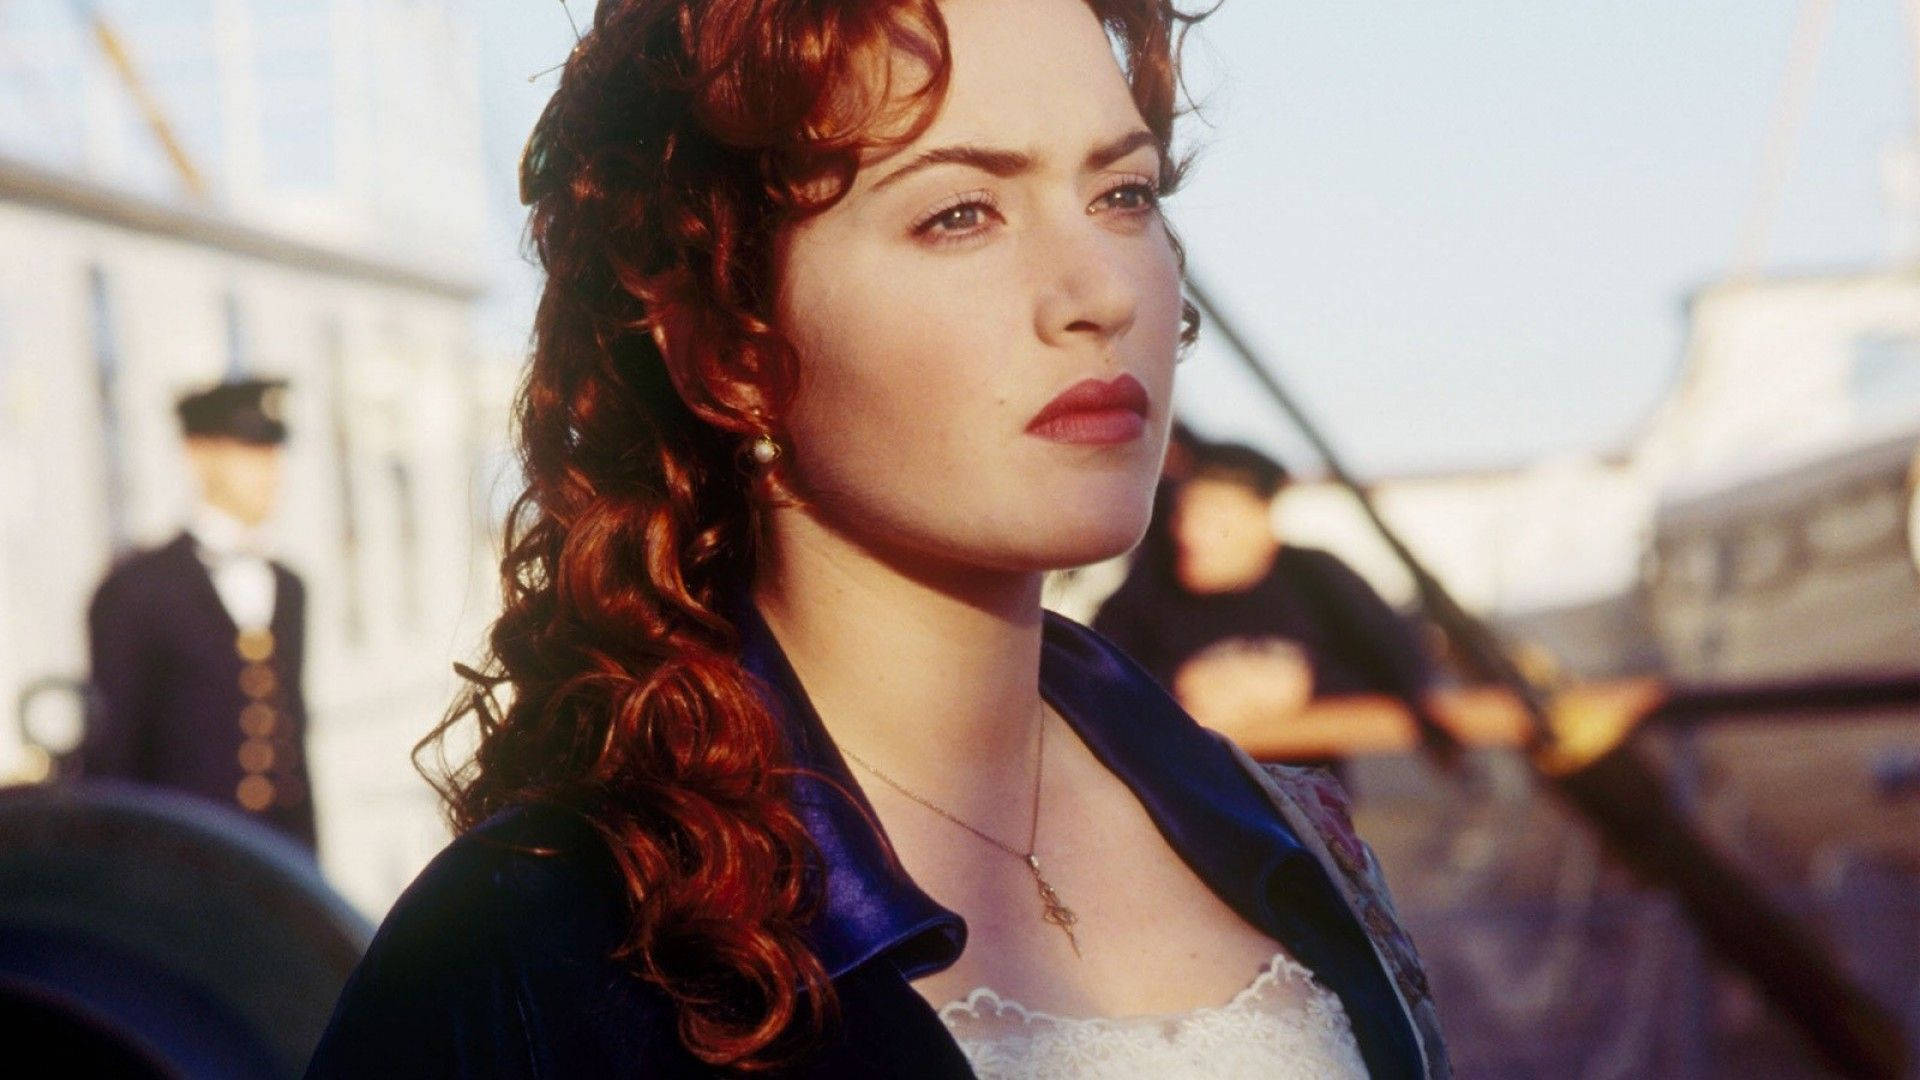 Free Kate Winslet Wallpaper Downloads, [100+] Kate Winslet Wallpapers for  FREE 